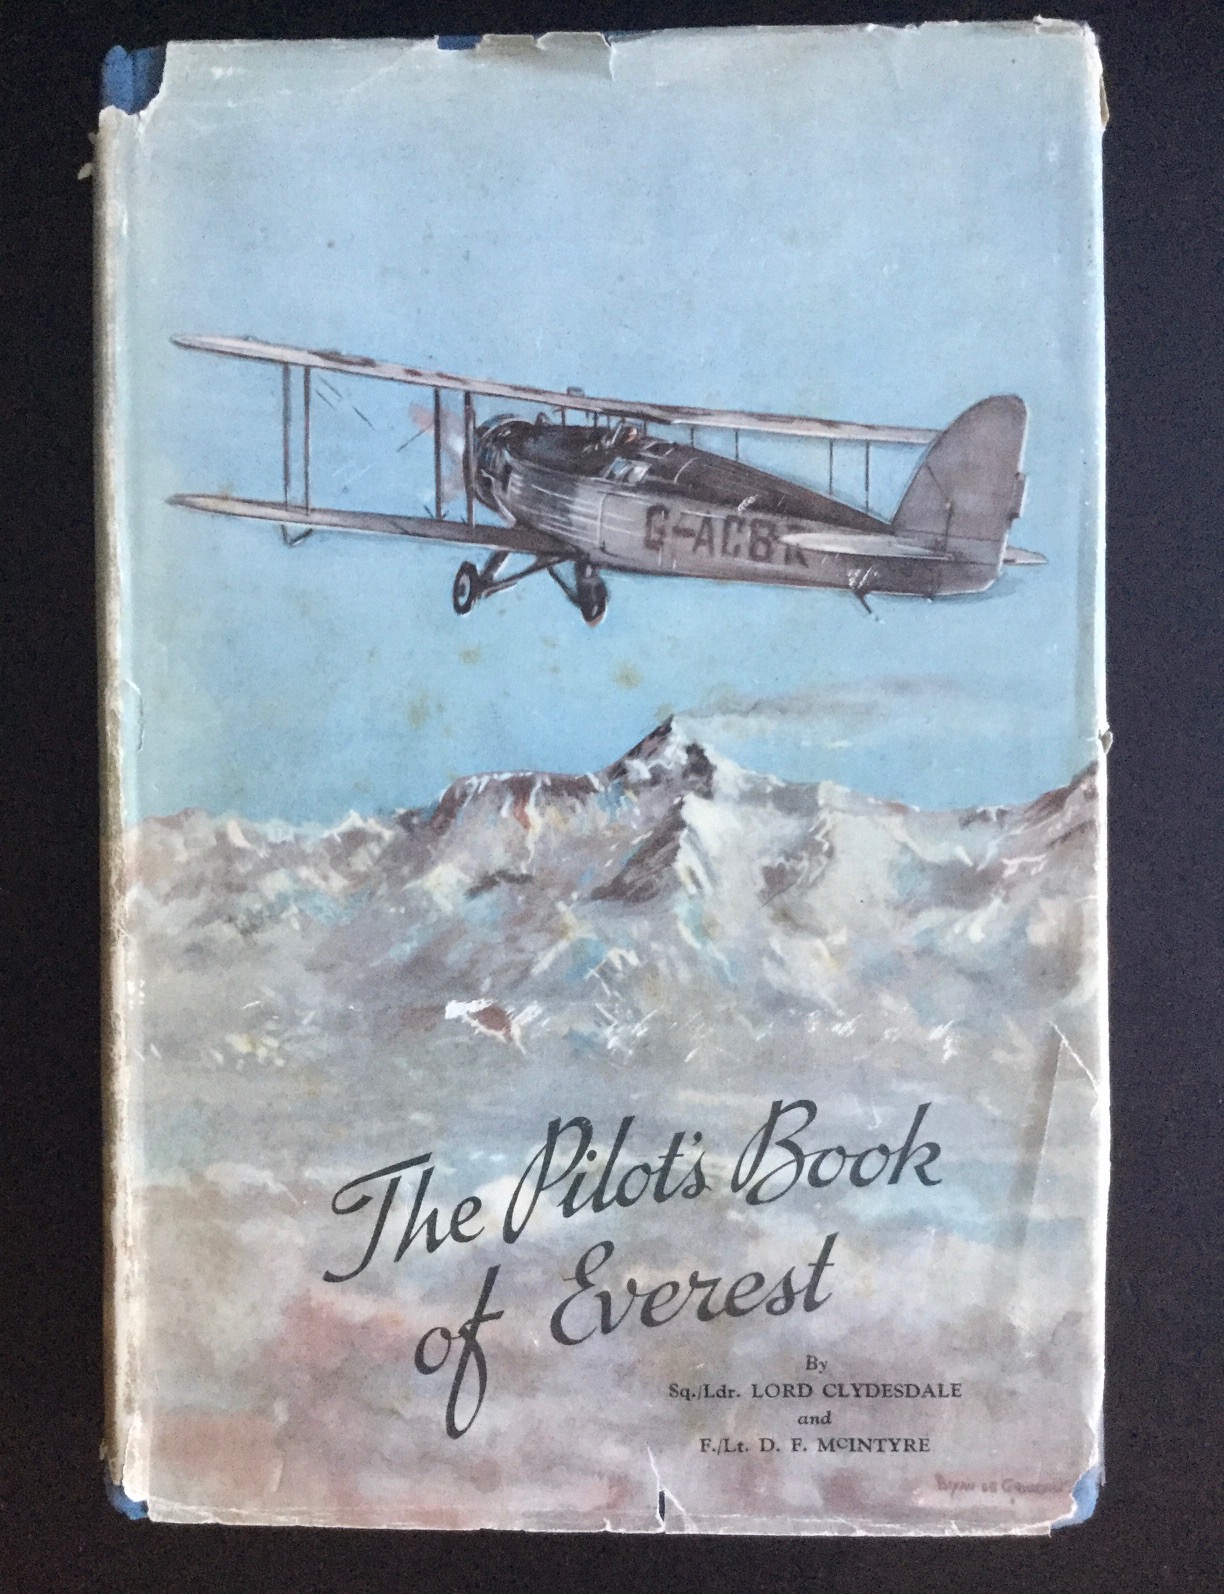 The Pilot's book of Everest - The Marquess of Clydesdale and Clydesdale & D.F. M'Intyre